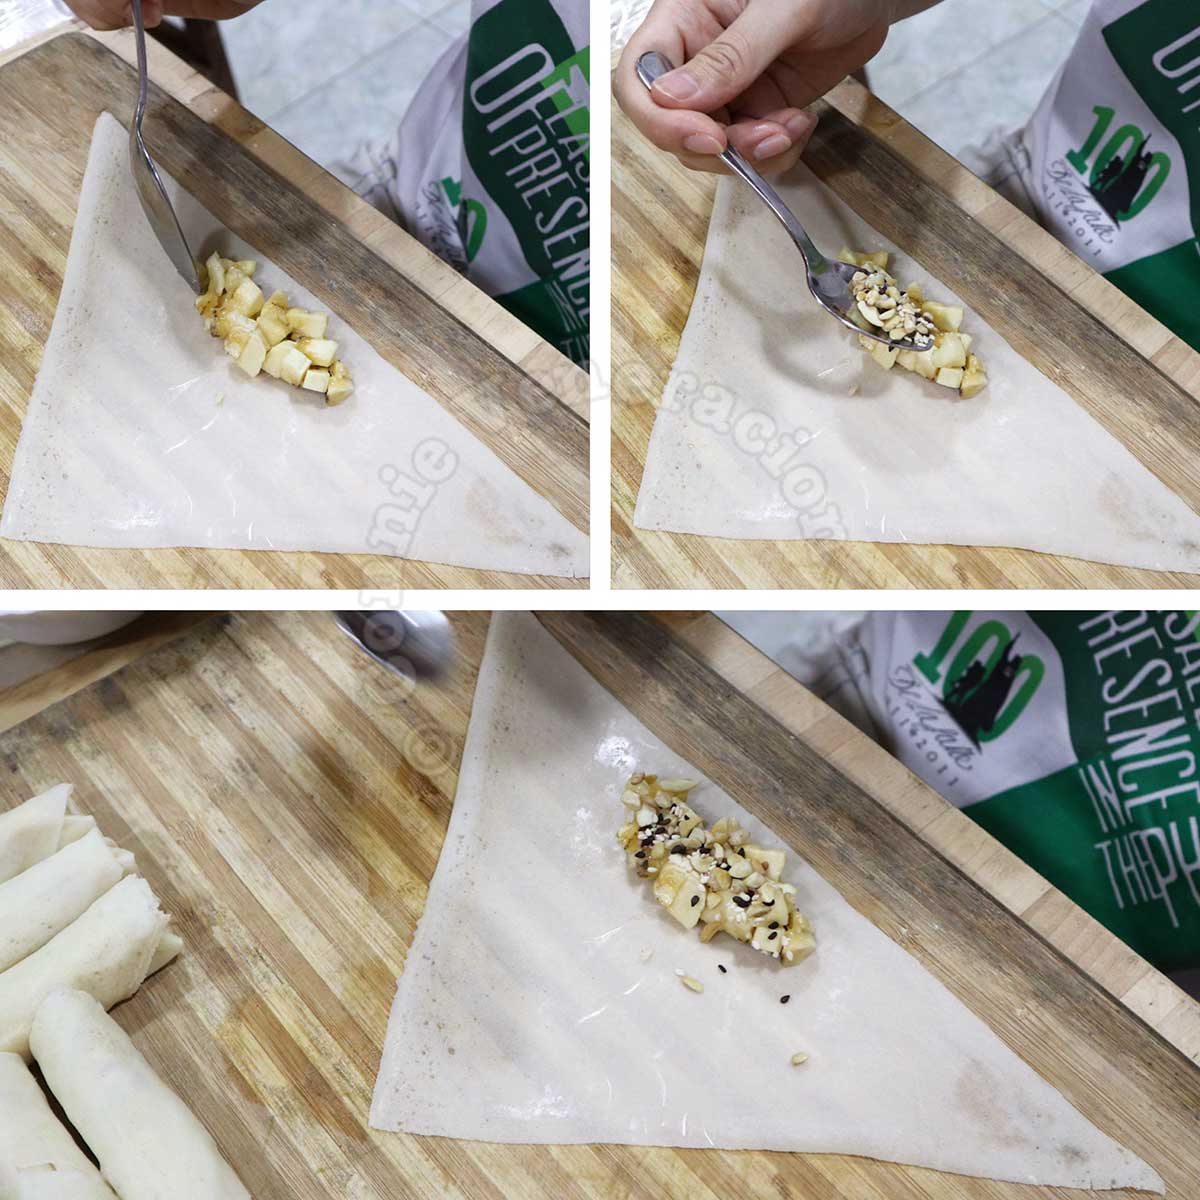 Filling spring rolls wrappers with banana, cashew nuts and sesame seeds